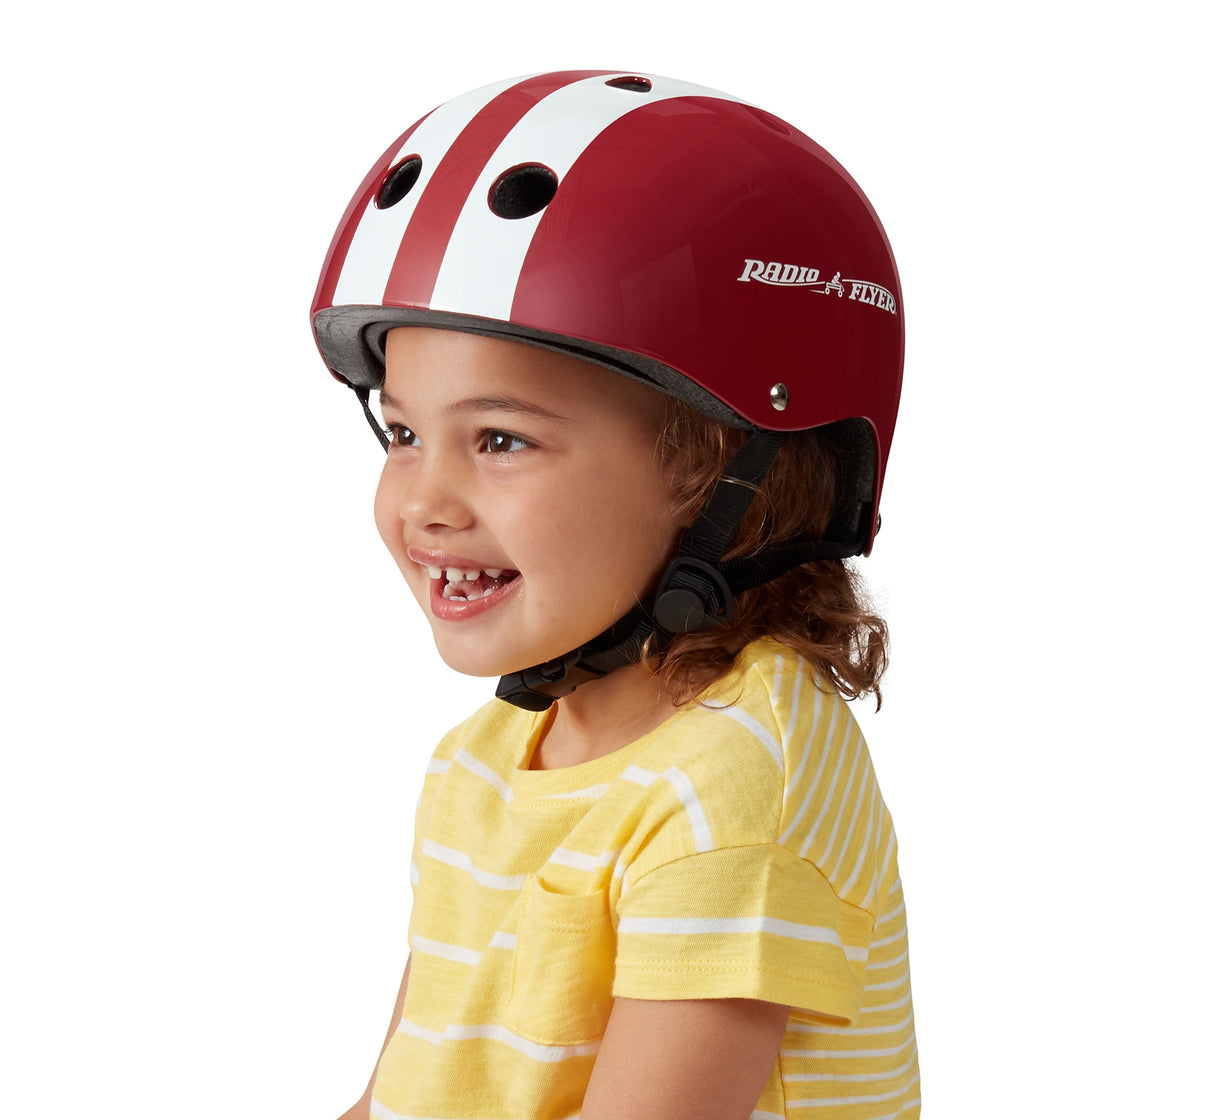 Radio Flyer® Helmet Red' viewed from front